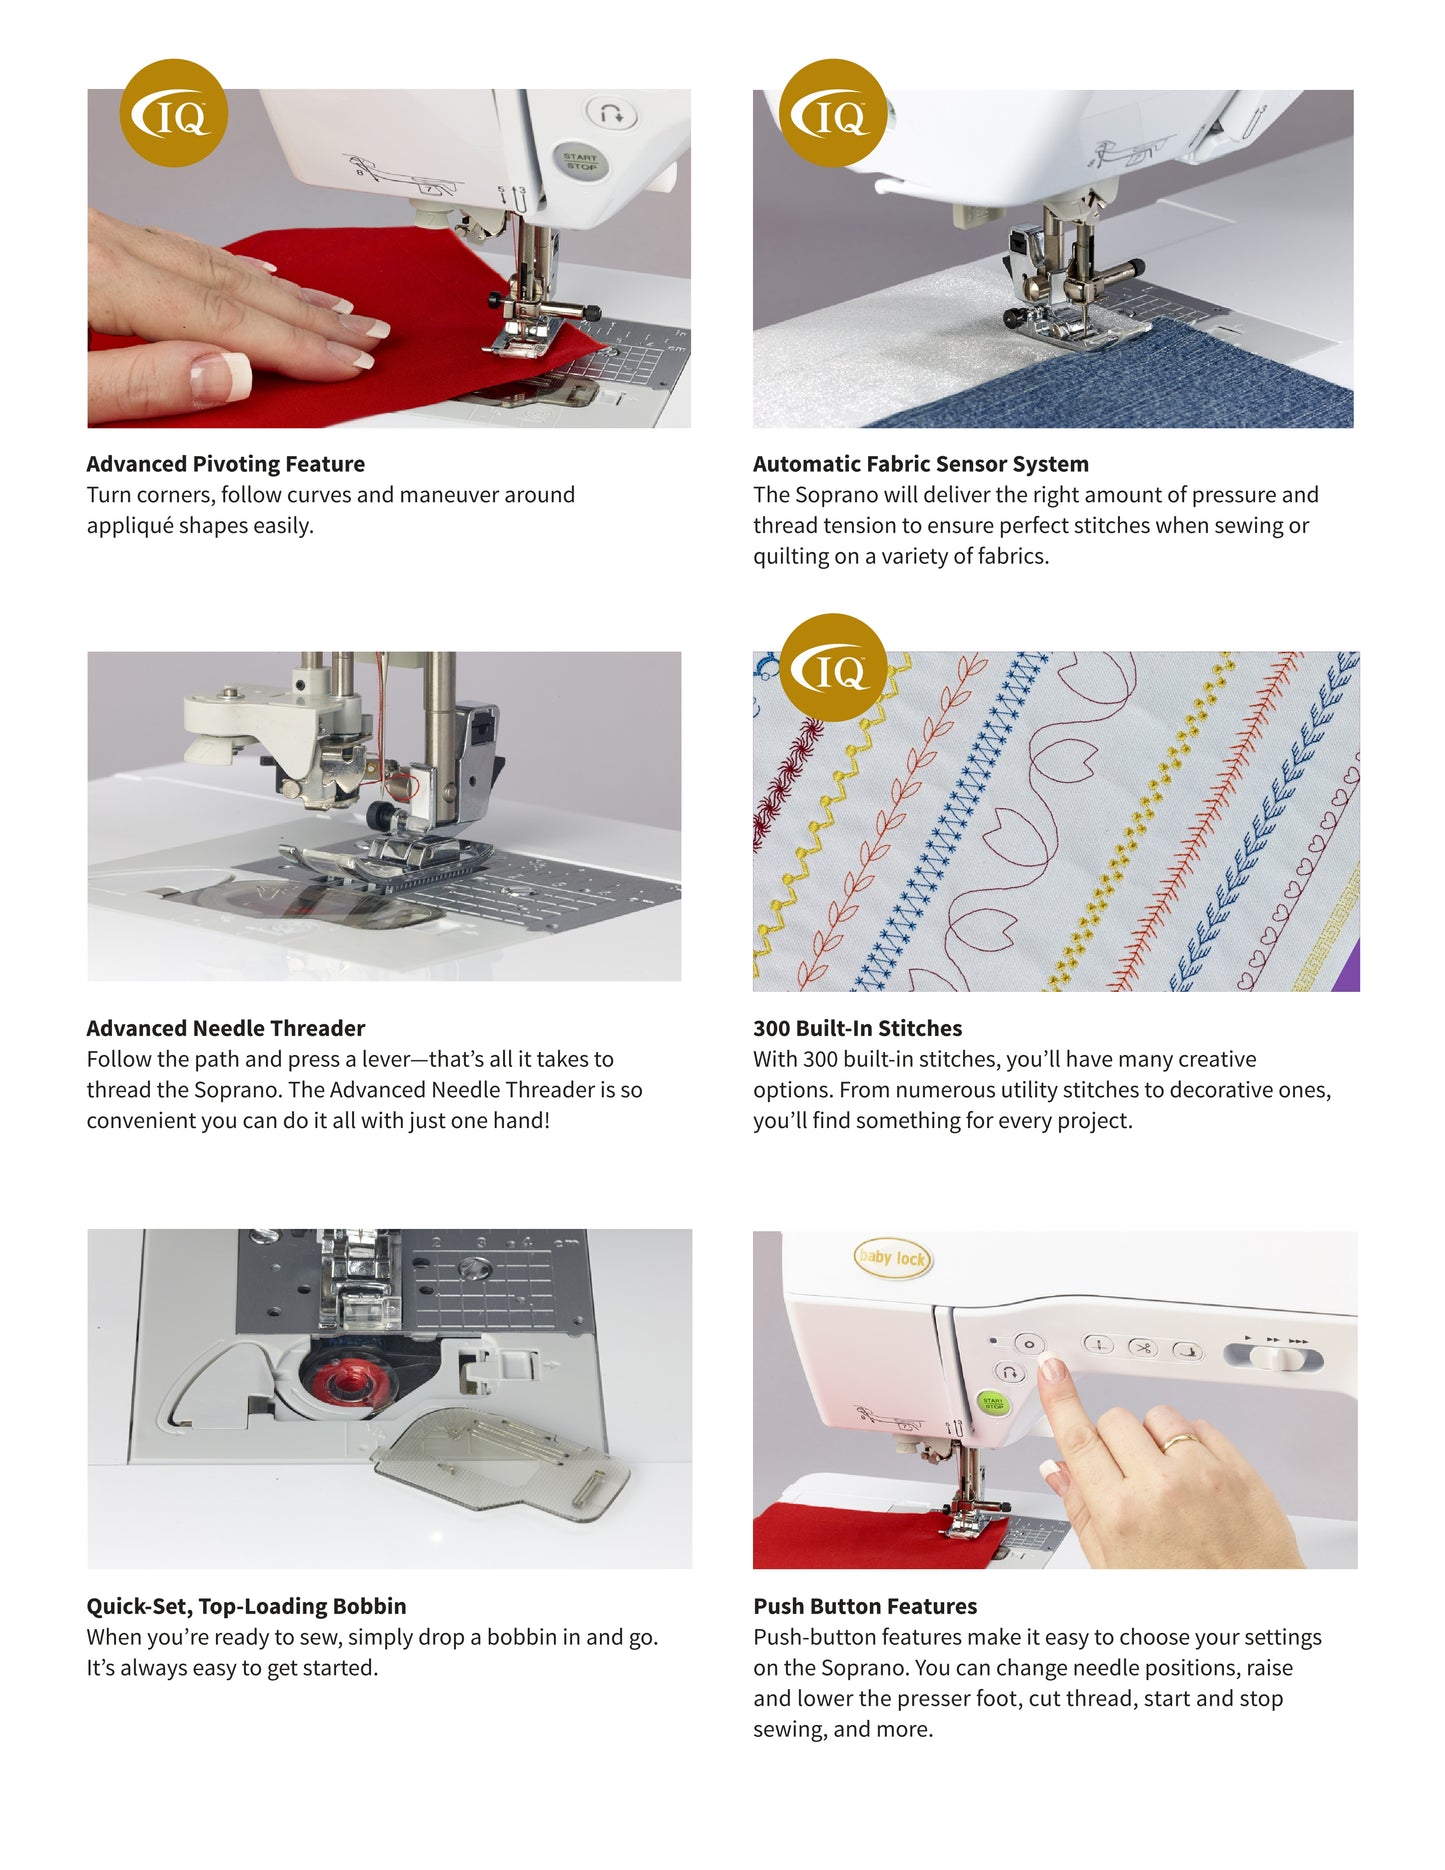 Baby Lock Soprano Sewing and Quilting Machine - Free Shipping